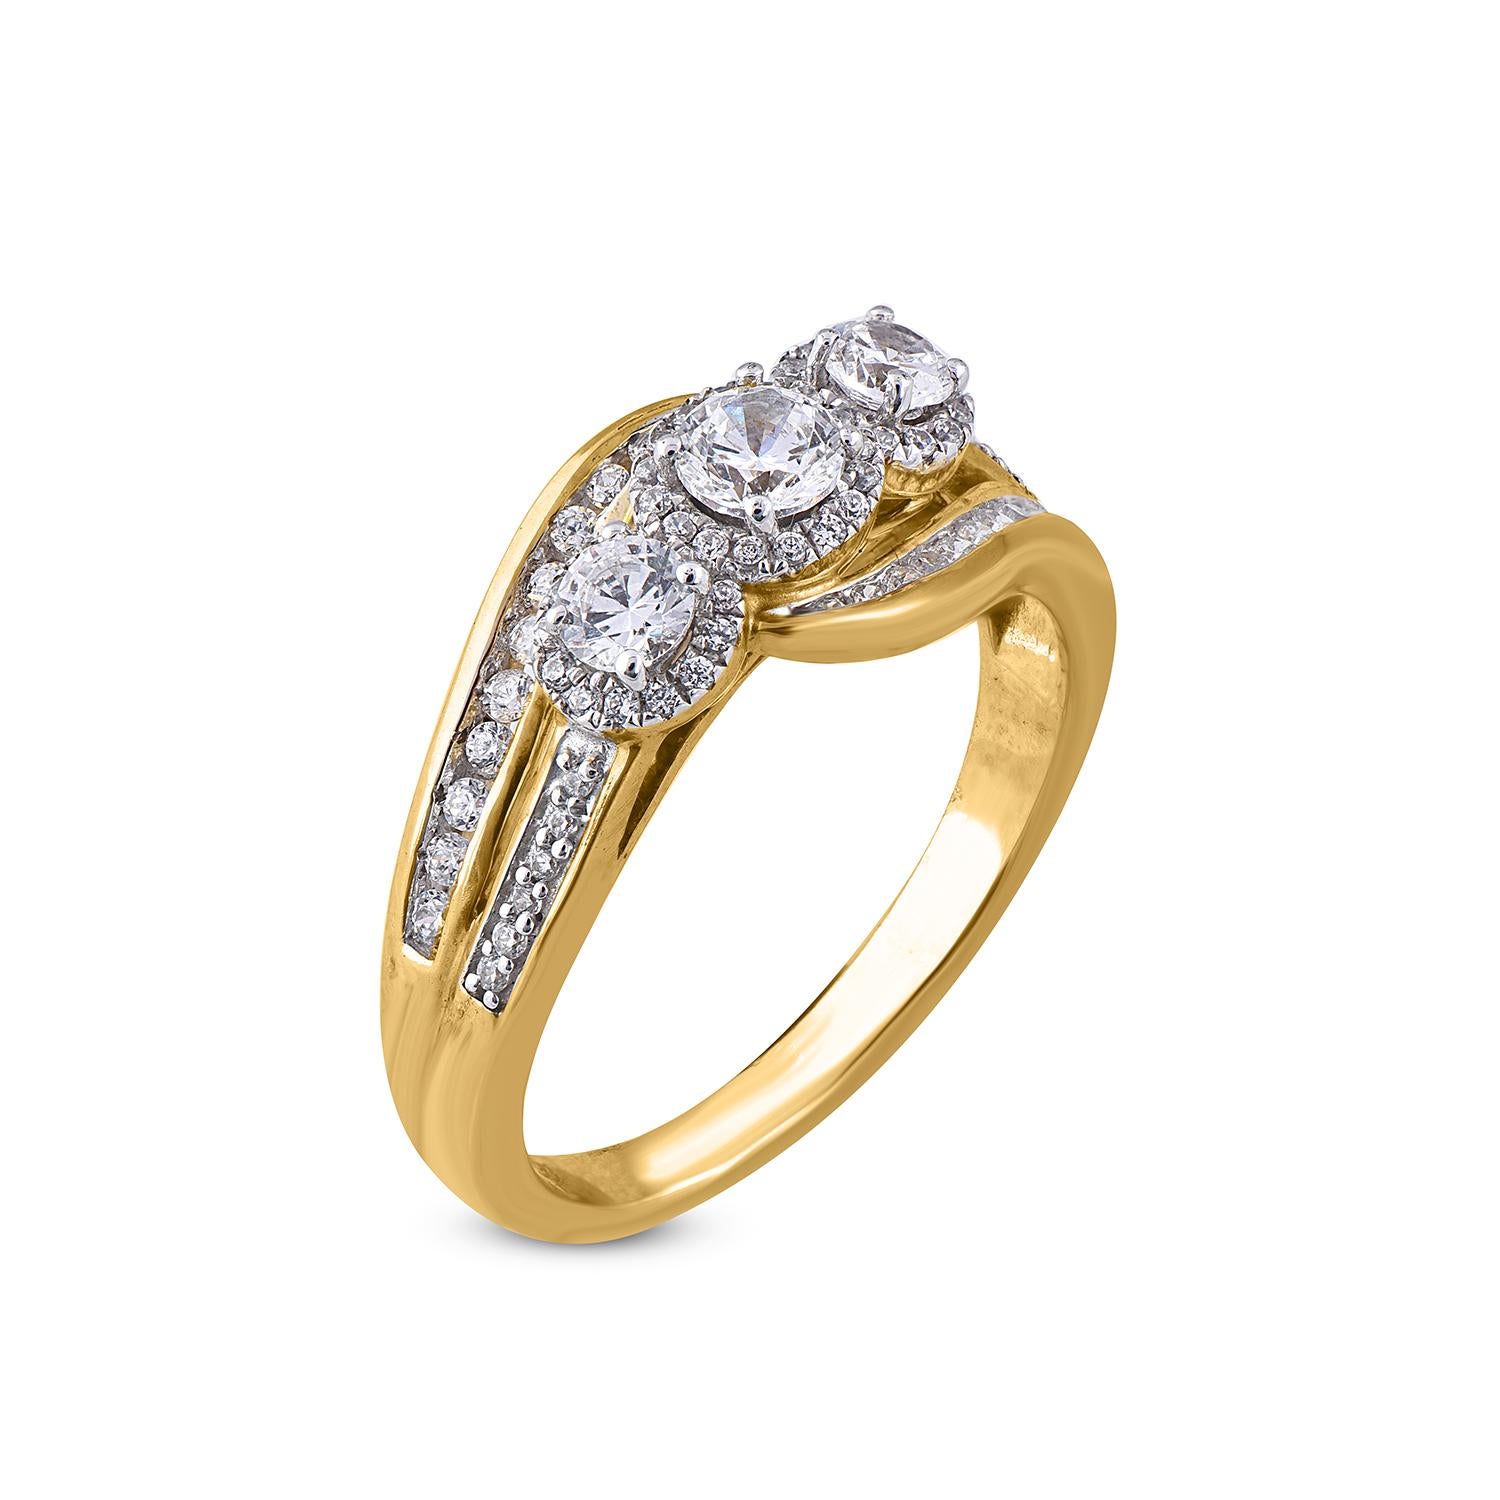 This dramatic ring shimmers with 75 diamonds 0.23ct of centre stone and each side diamond is 0.107 ct and remaining diamond on frame and shank lined diamonds secured in prong, pave and channel setting crafted in 18 karat Yellow gold. Diamonds are